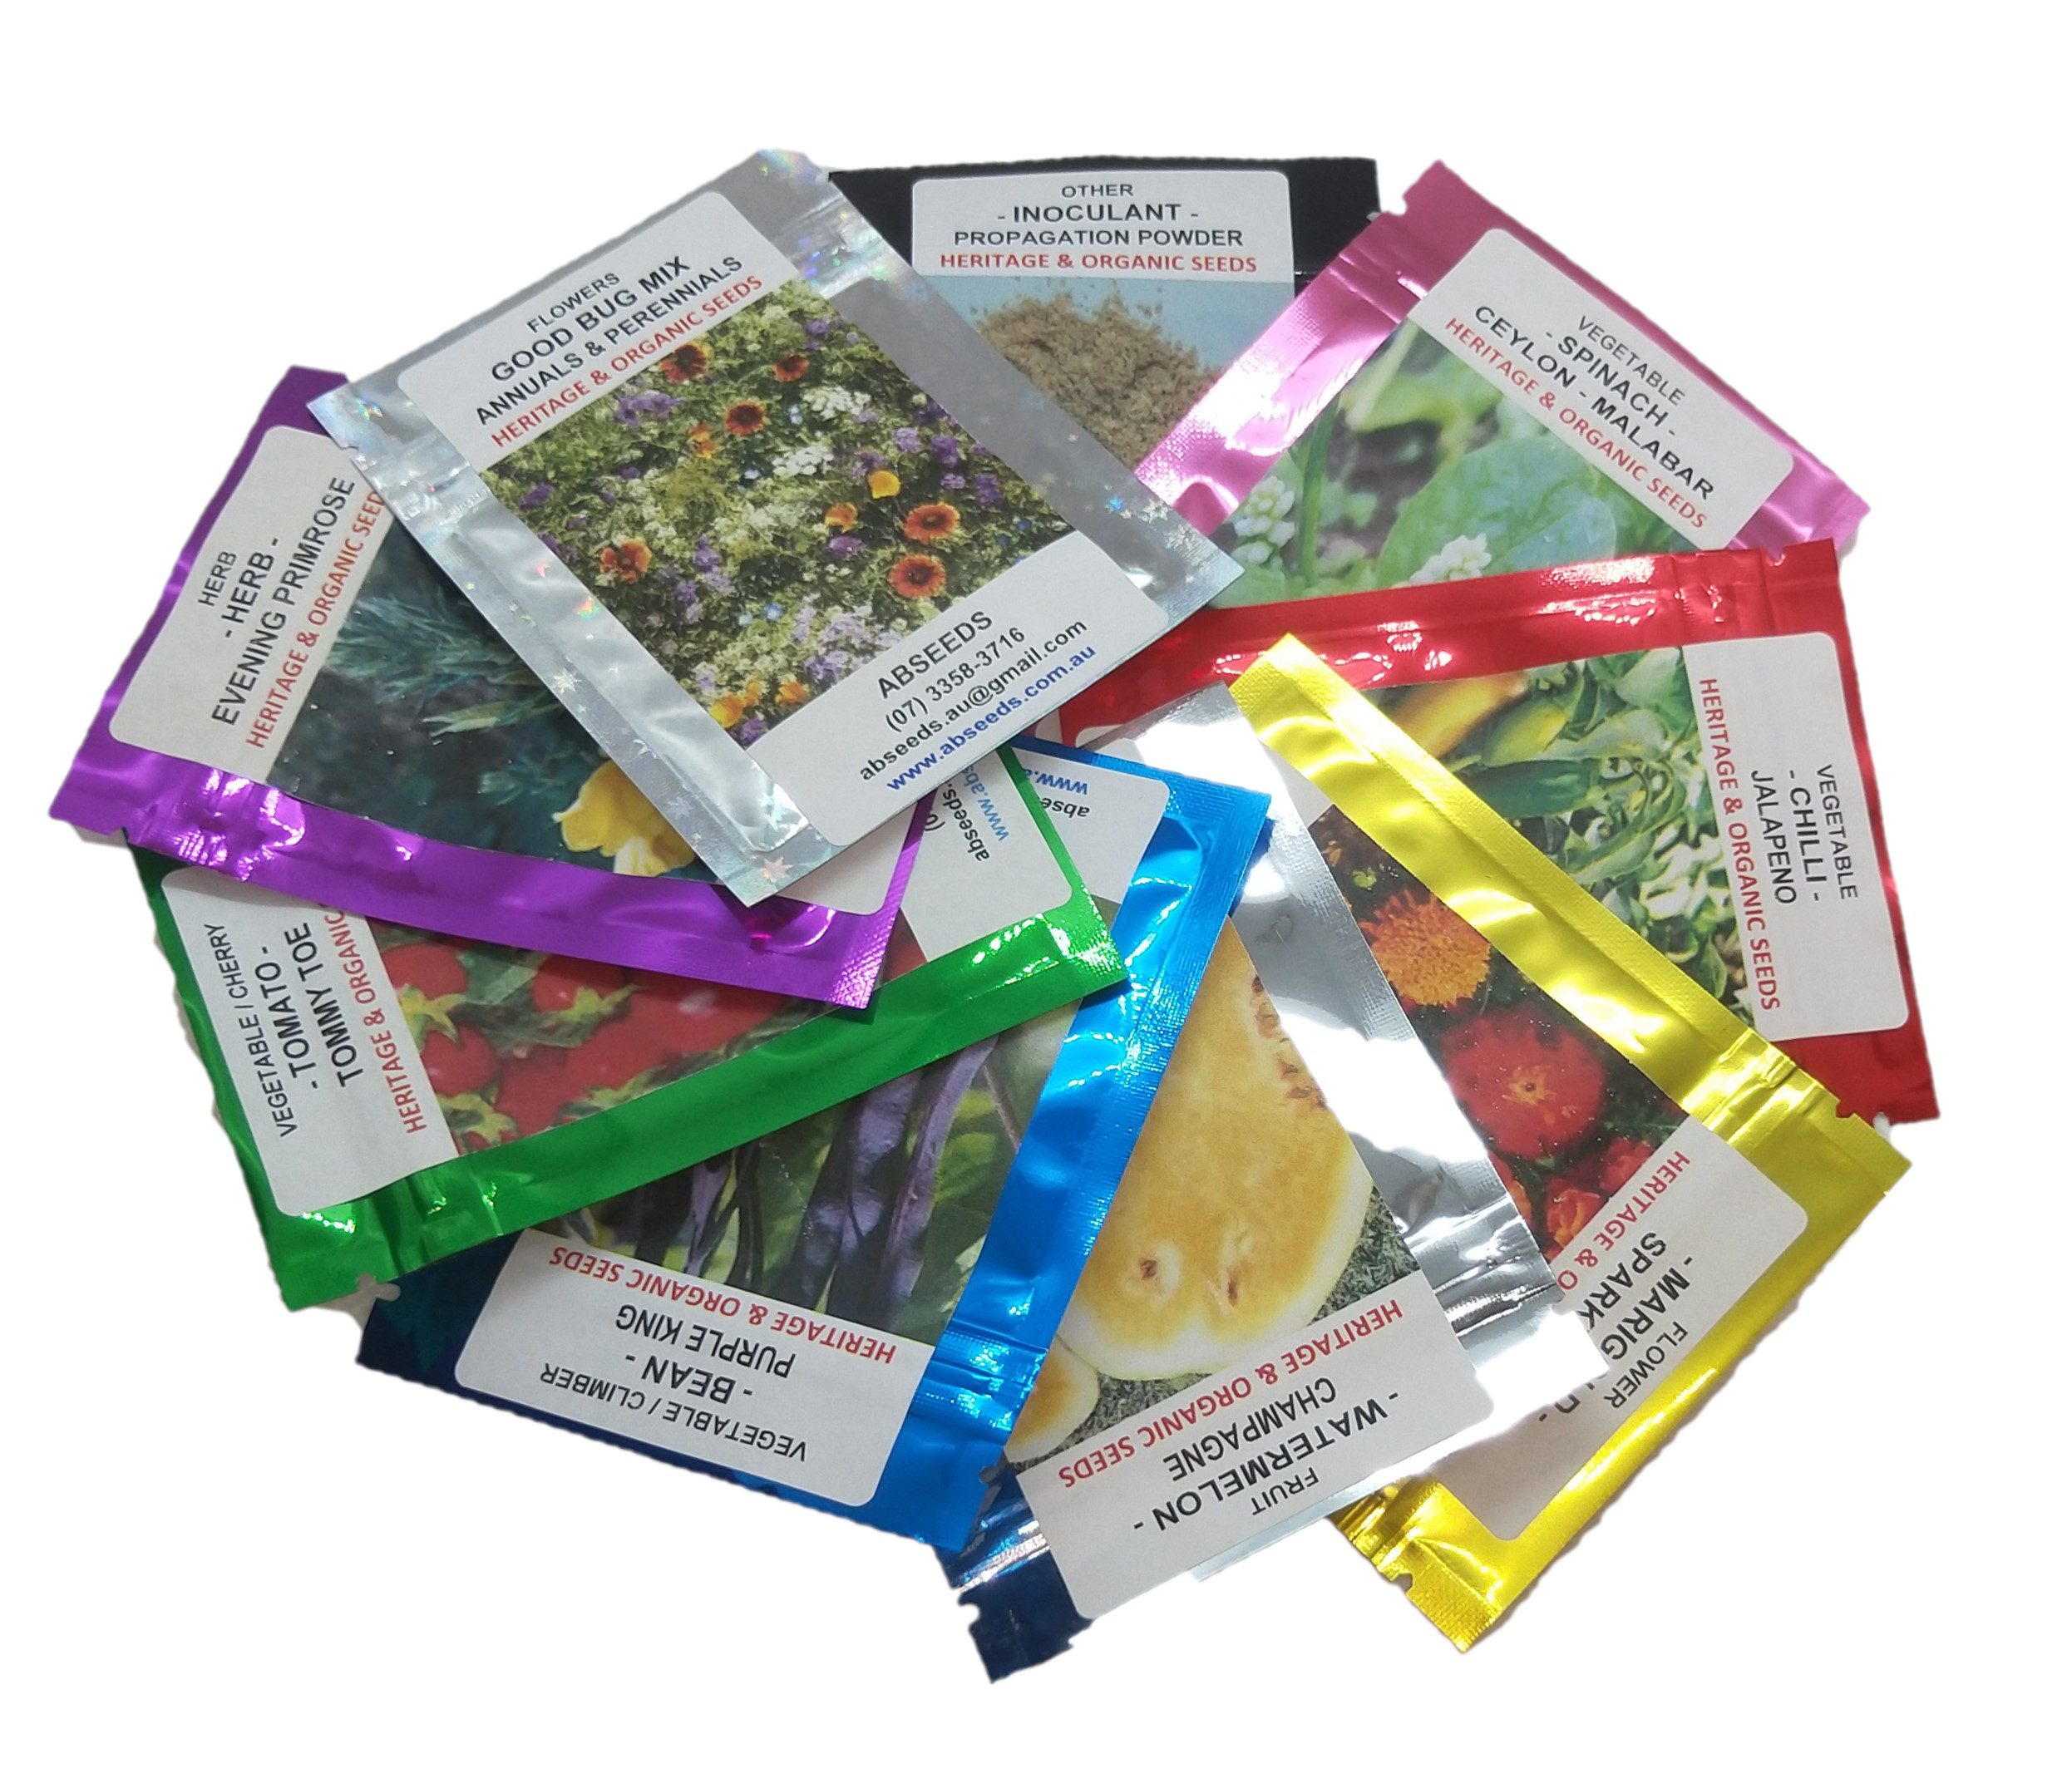 Heritage_Organic_Seeds_Packets